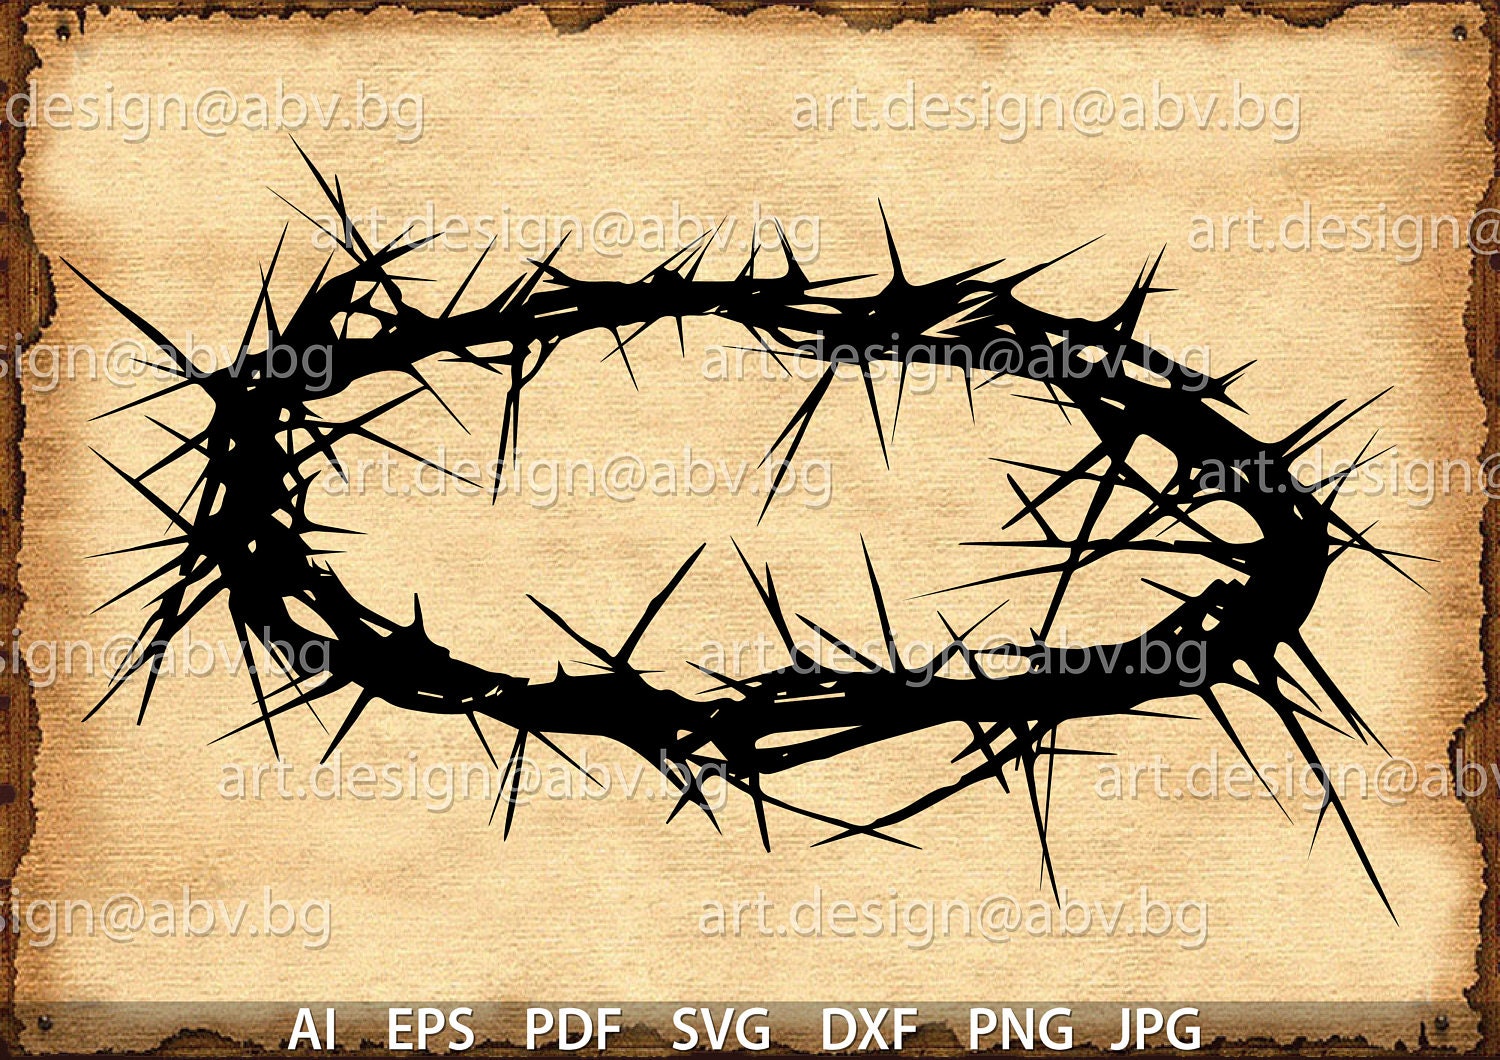 Download Vector CROWN of thorns AI eps pdf svg dxf png jpg